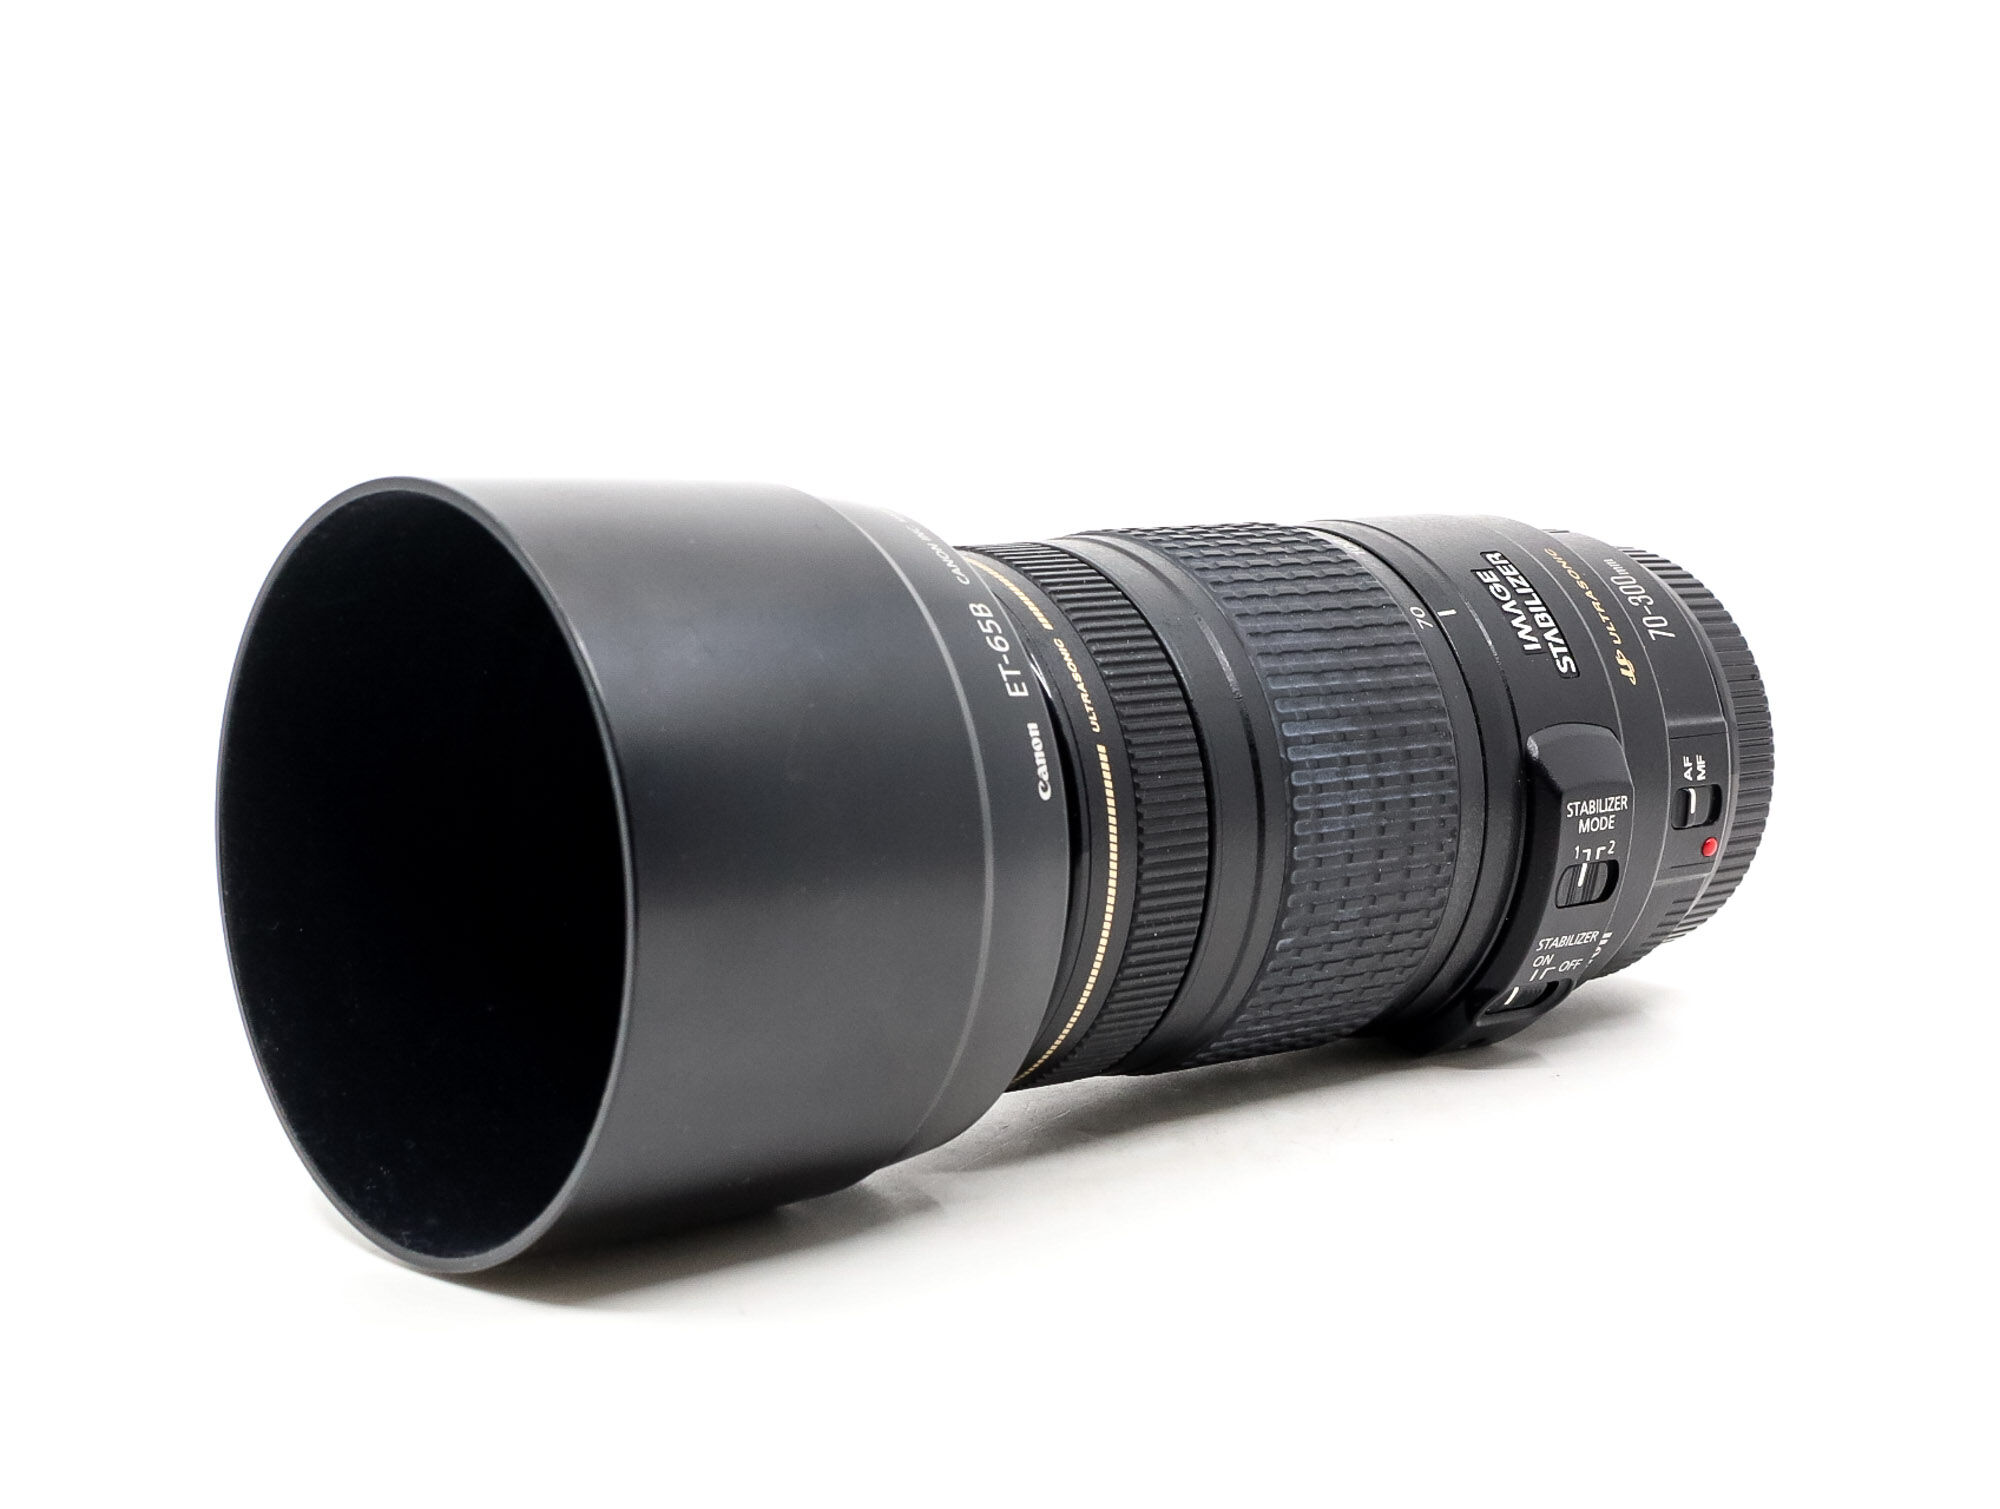 canon ef 70-300mm f/4-5.6 is usm (condition: good)